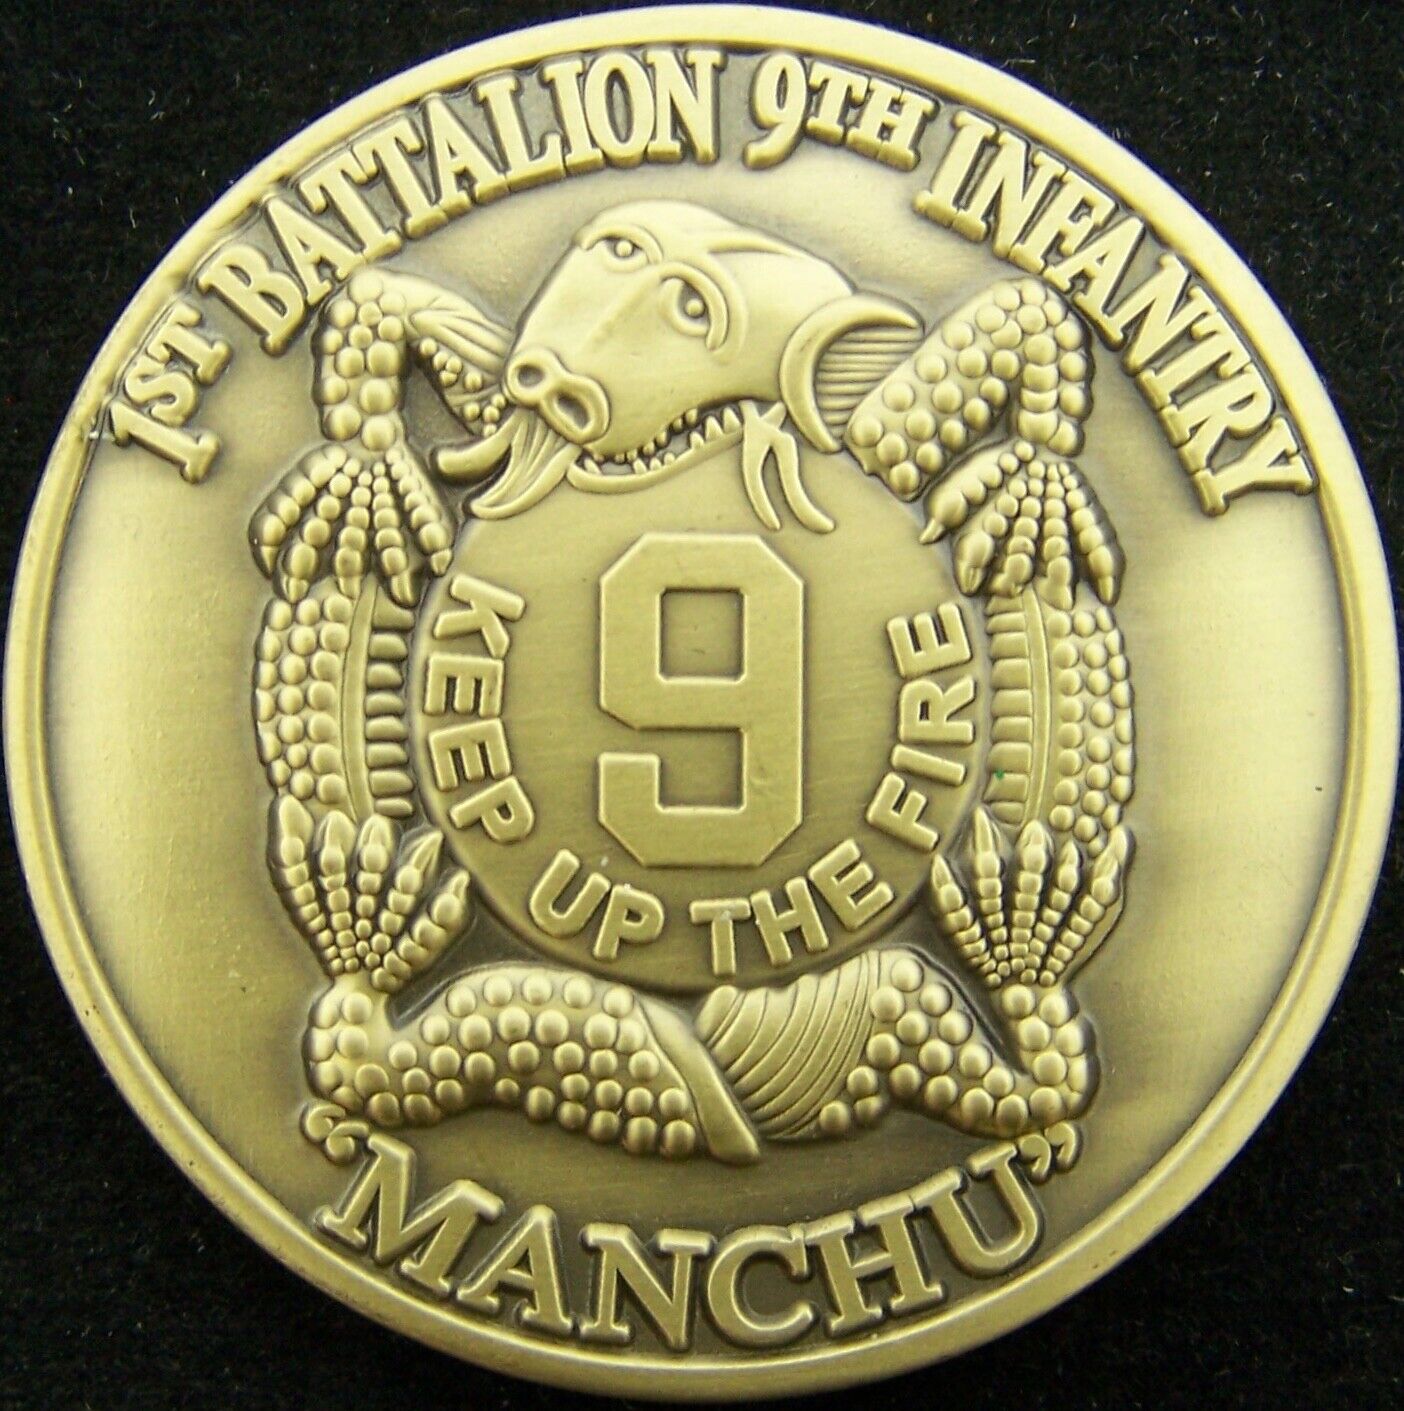 1st Battalion 9th Infantry Manchu Keep up the Fire DMZ Challenge Coin